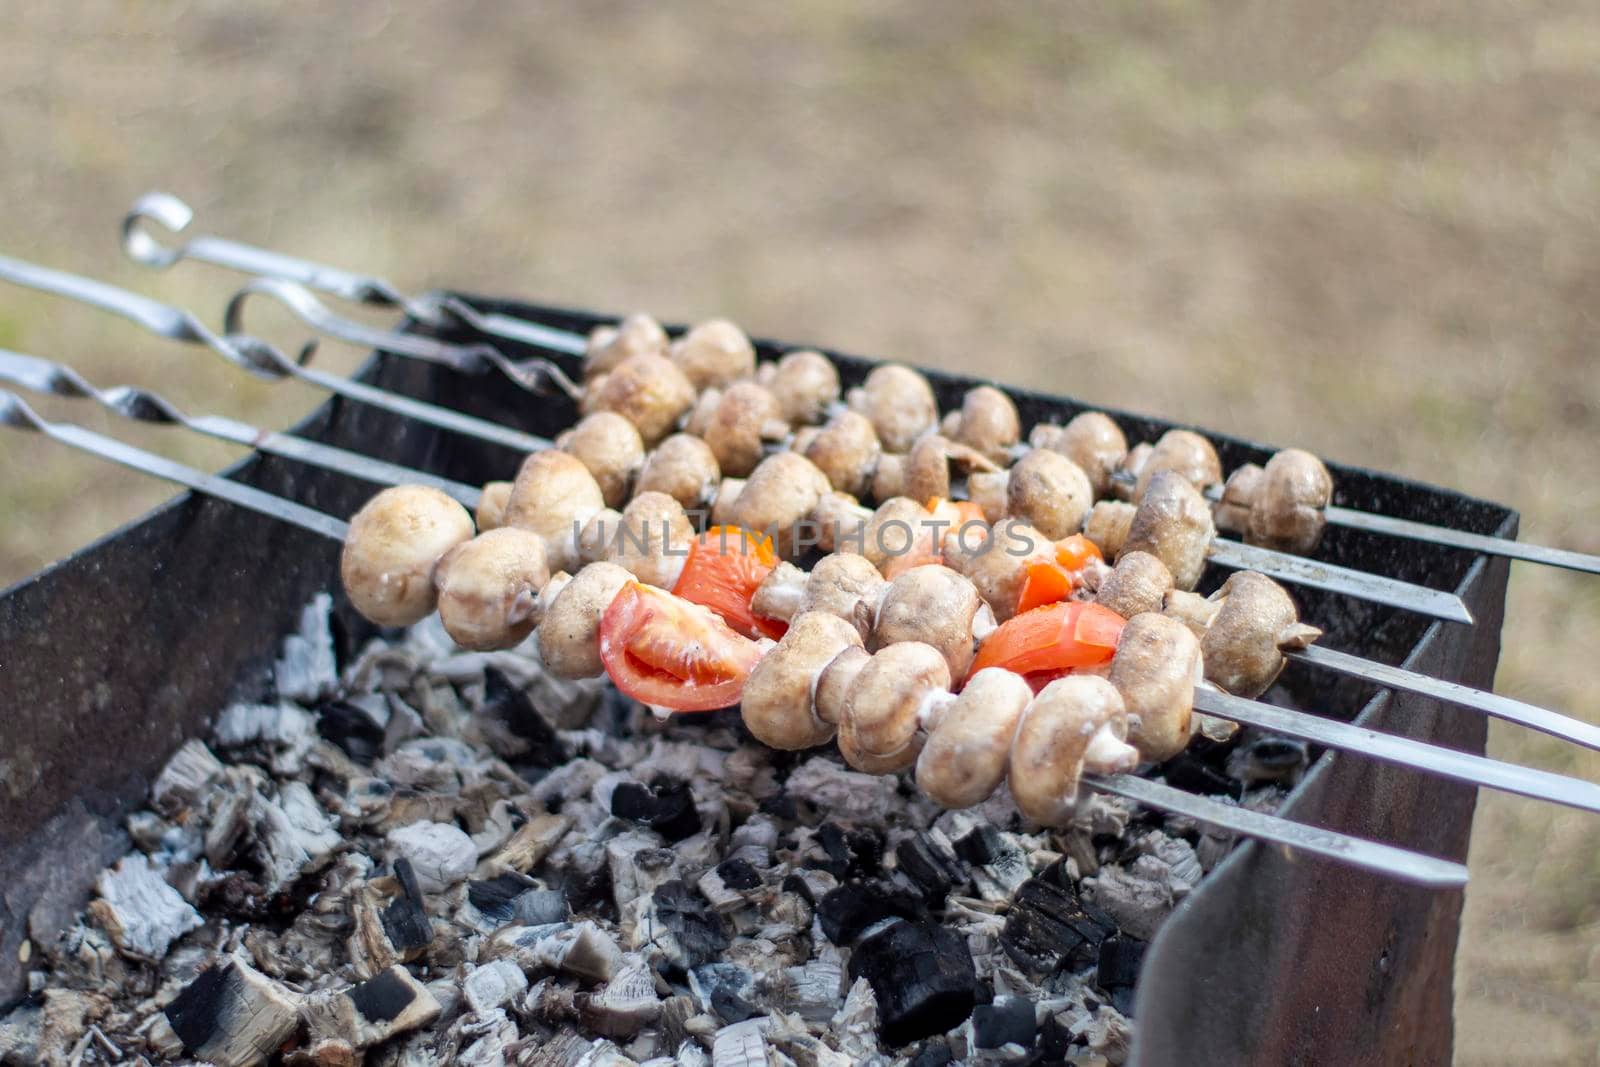 Barbeque. In nature, on the grill, mushrooms in combination with tomatoes.